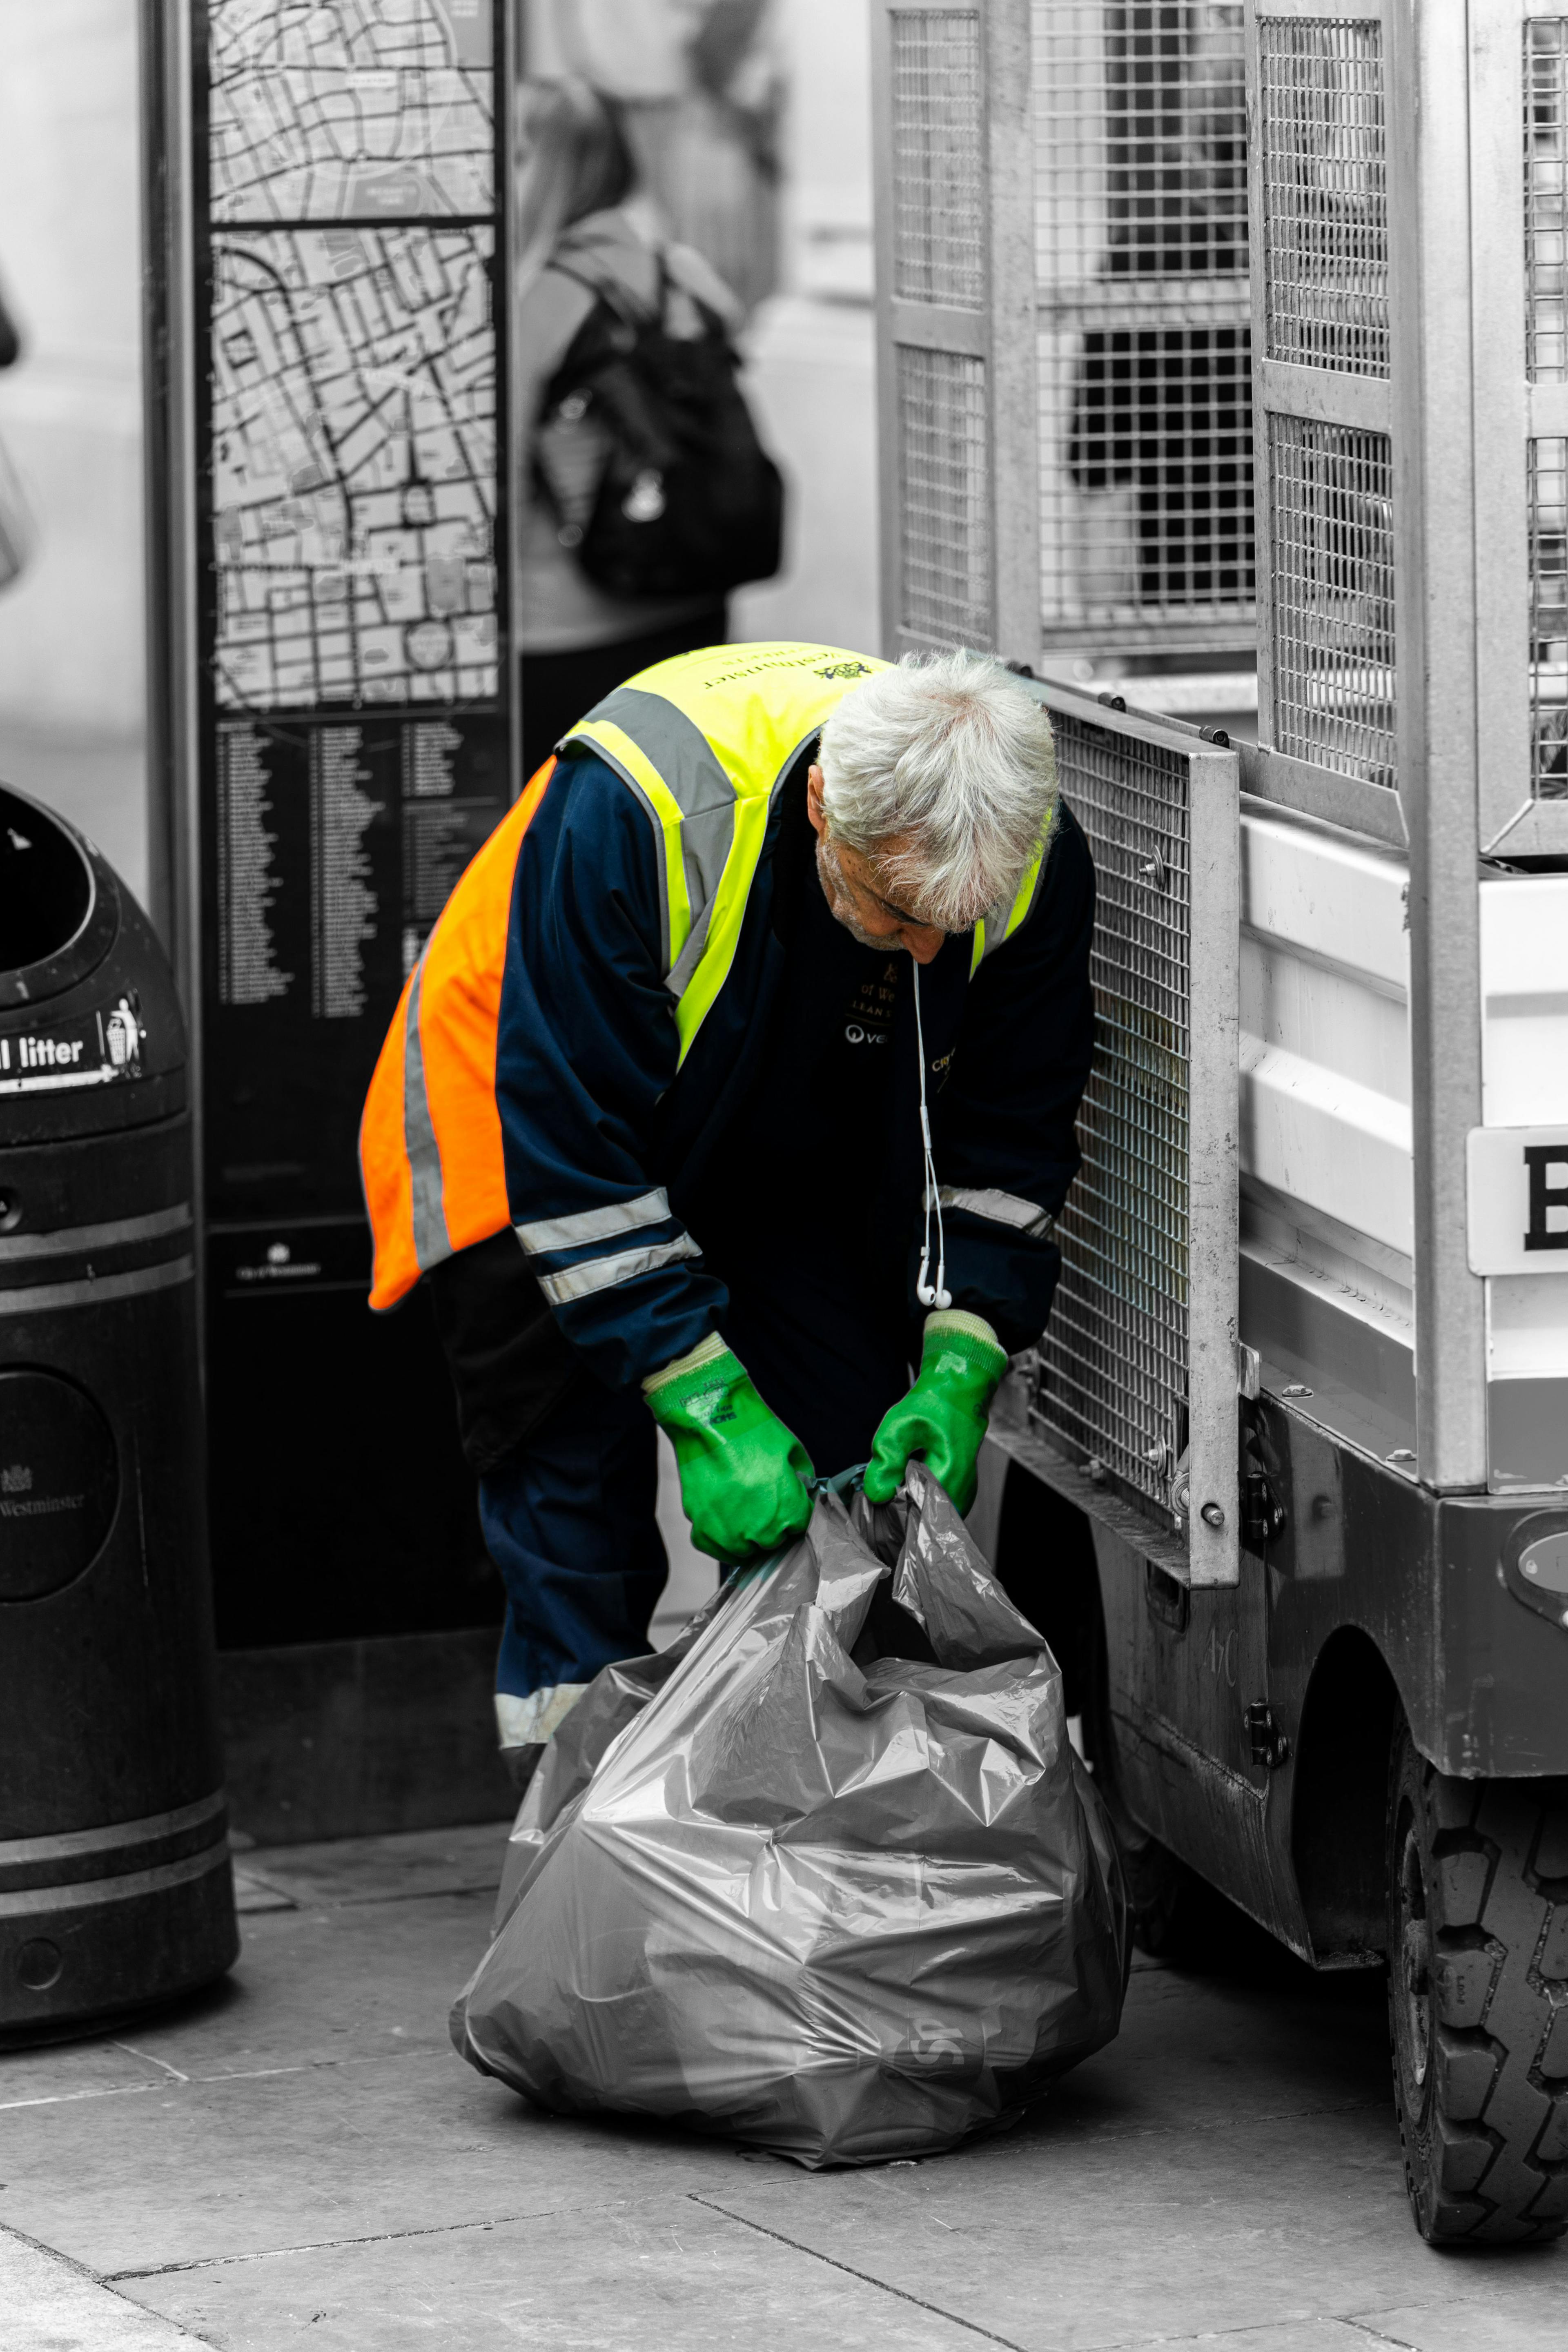 Refuse worker in protective clothing and gloves looks down as he ties up a rubbish bag